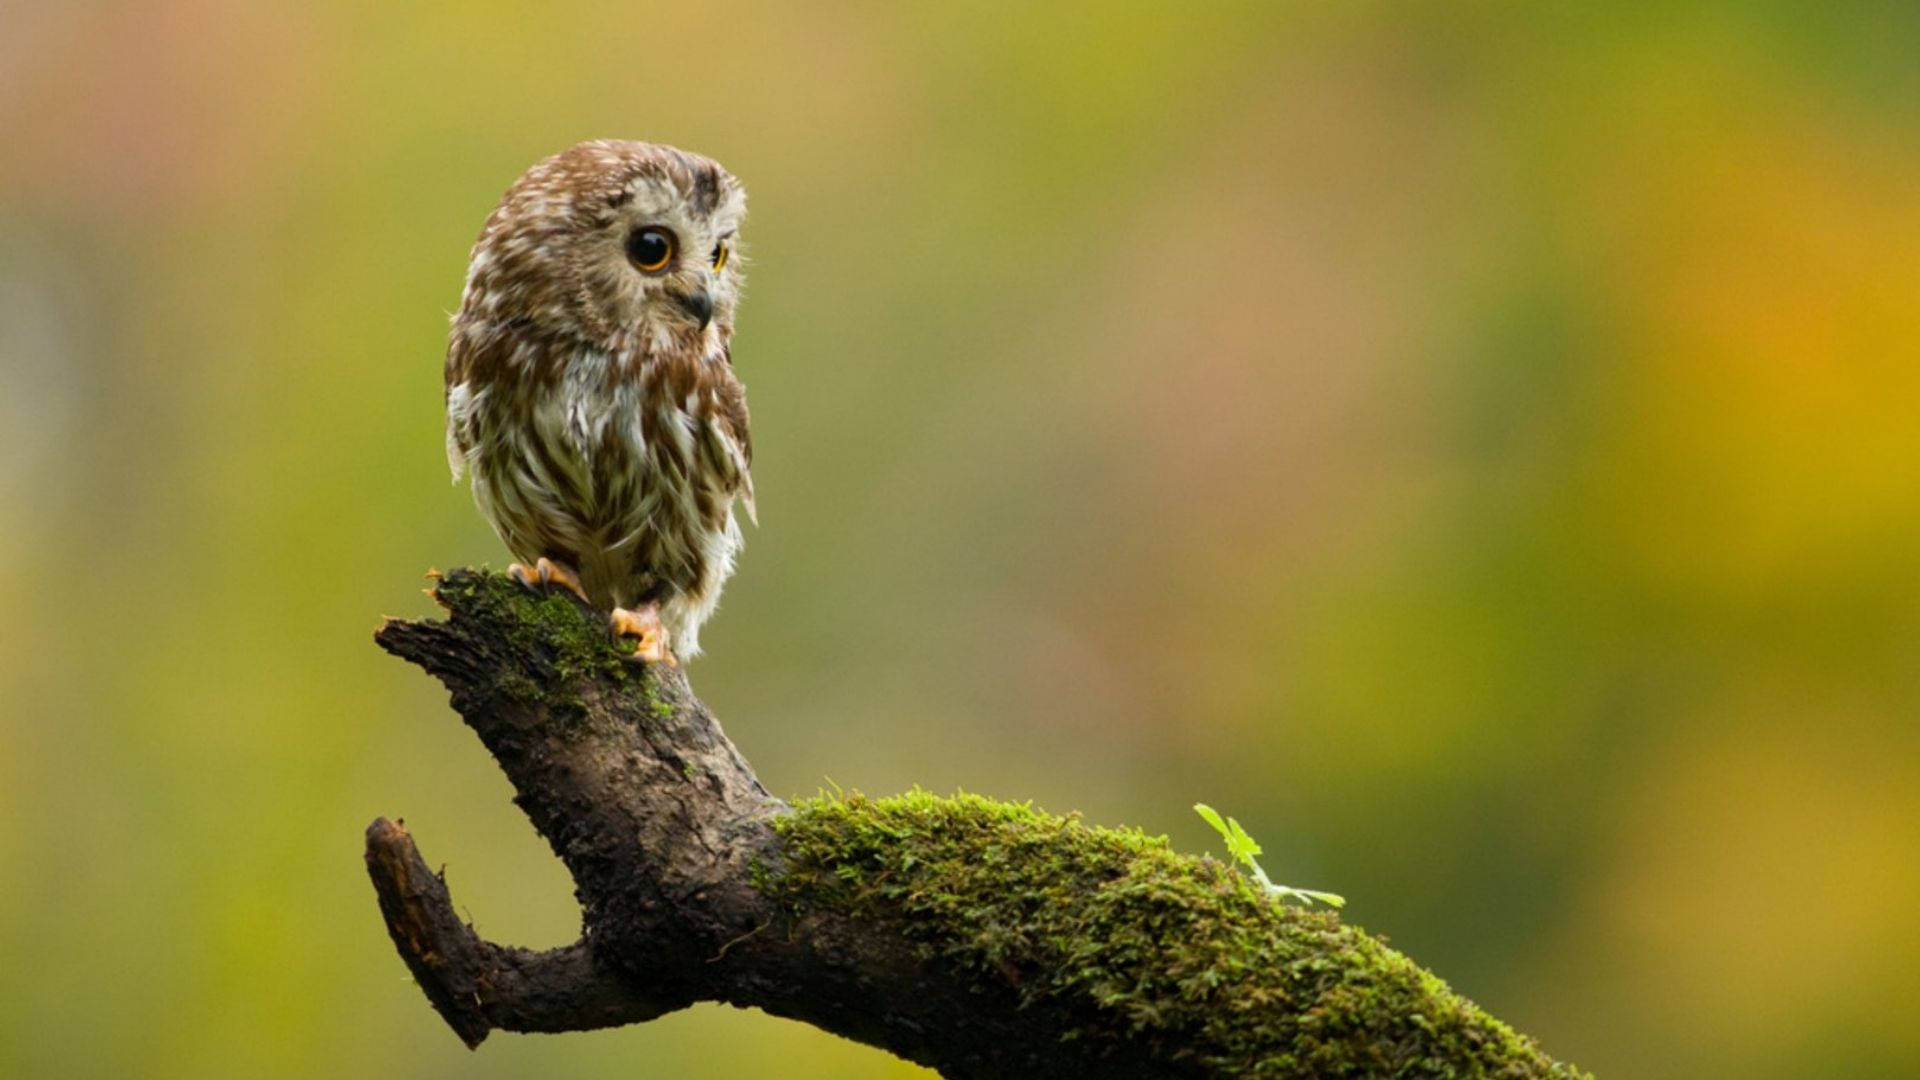 Baby Owl On A Wooden Stick